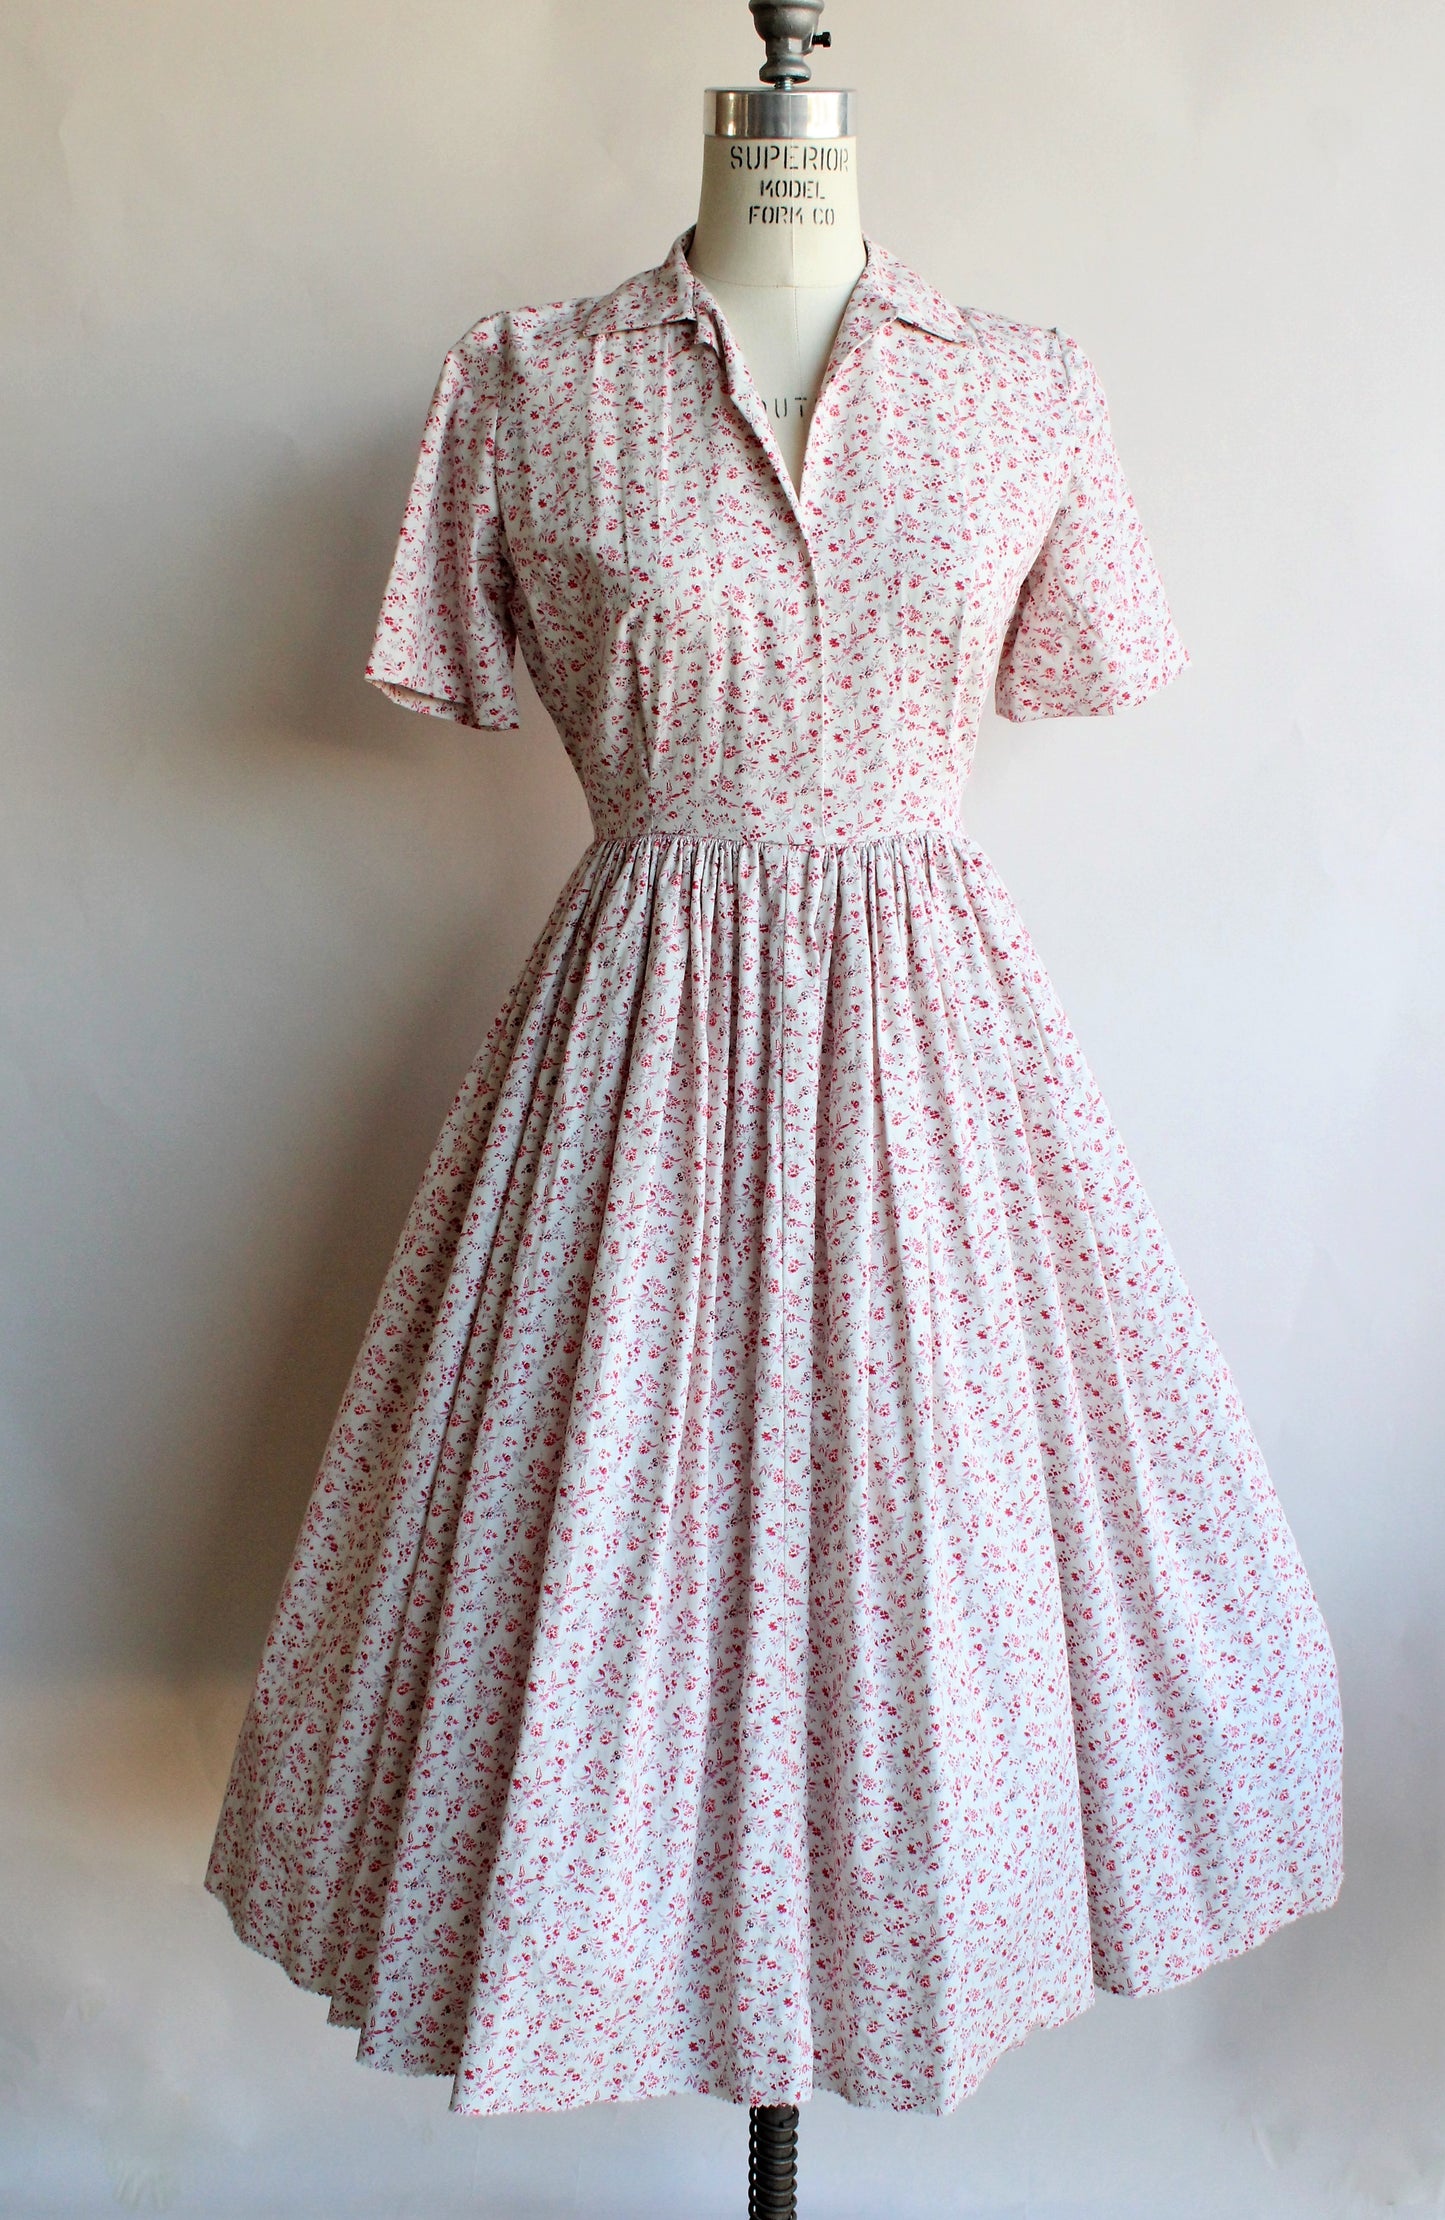 Vintage 1950s Fit and Flare Floral Print Cotton Dress